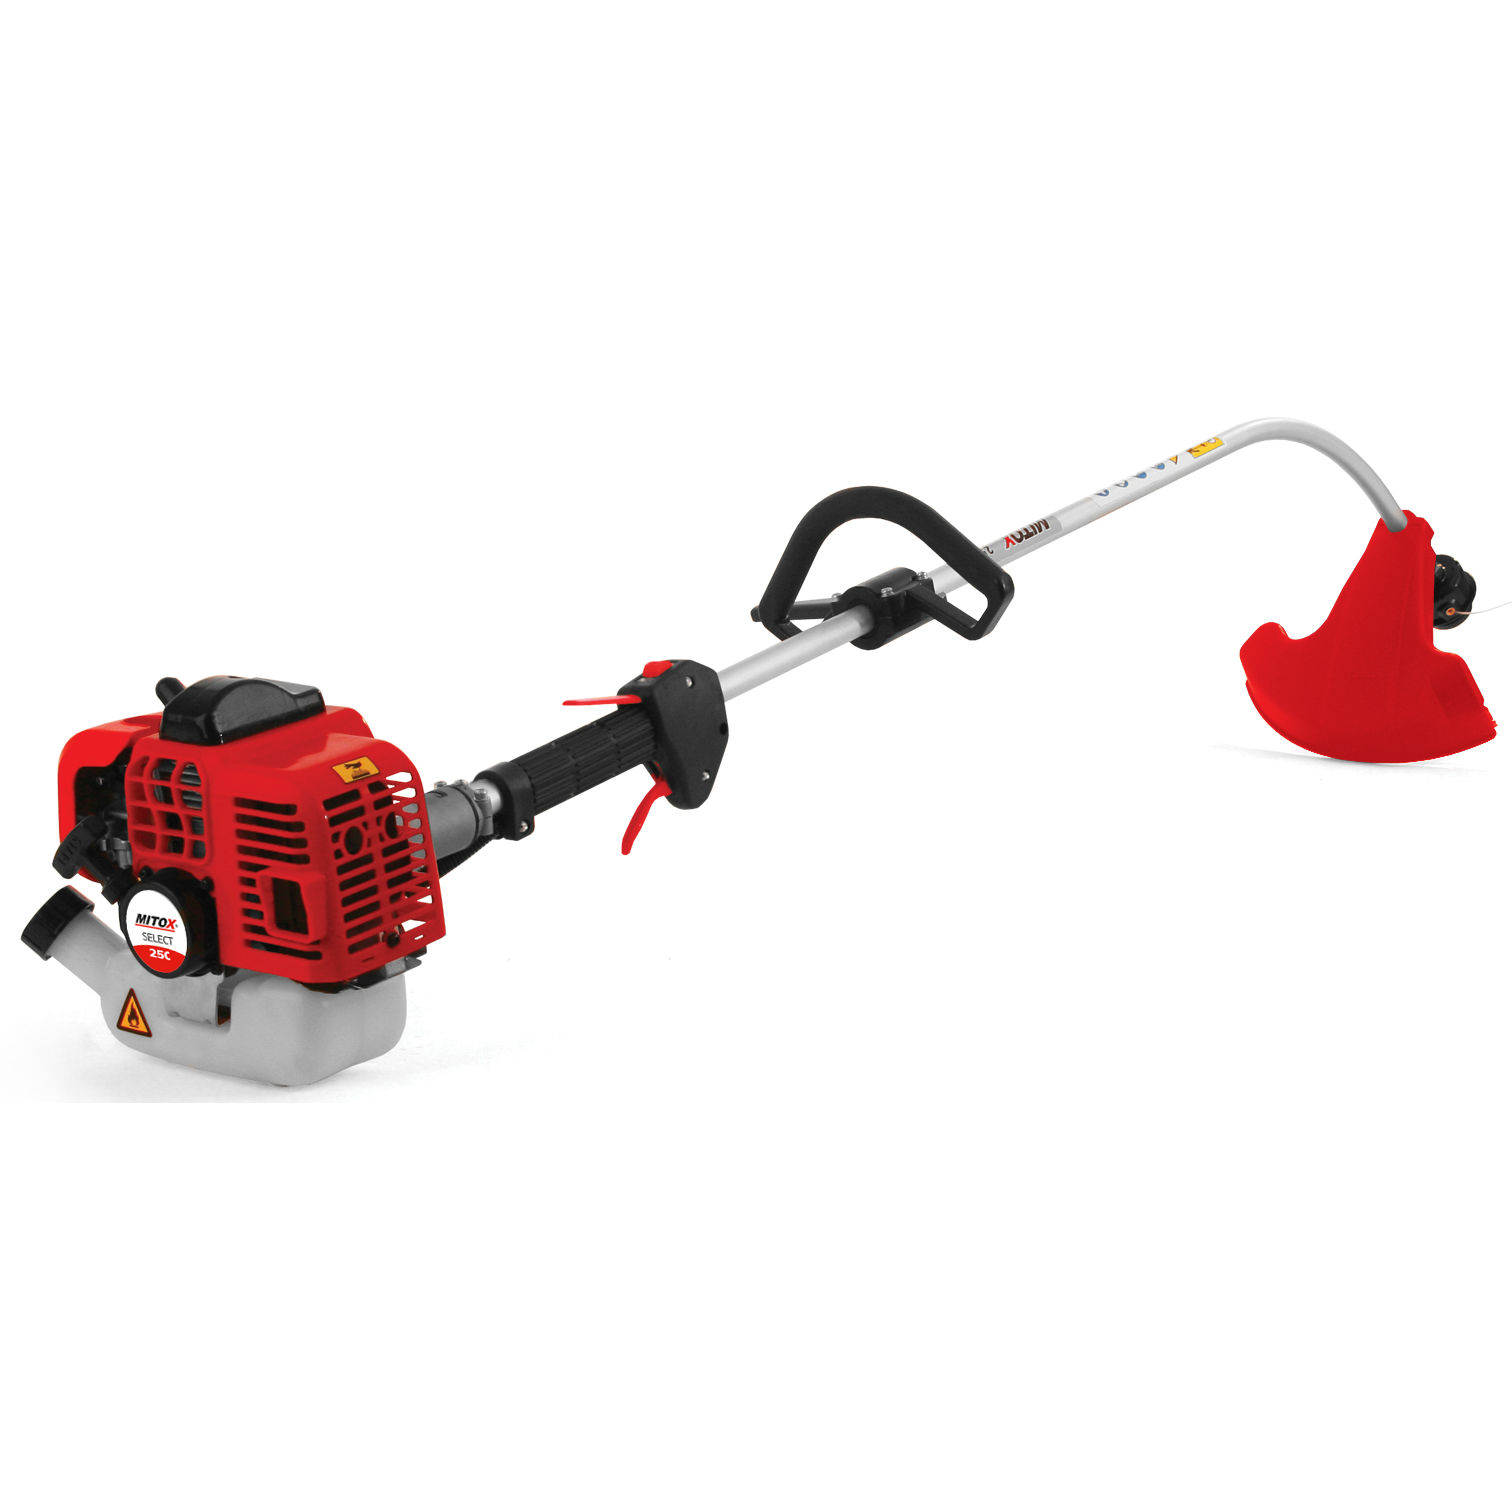 Mitox 25C Petrol Grass Trimmer Special Offer